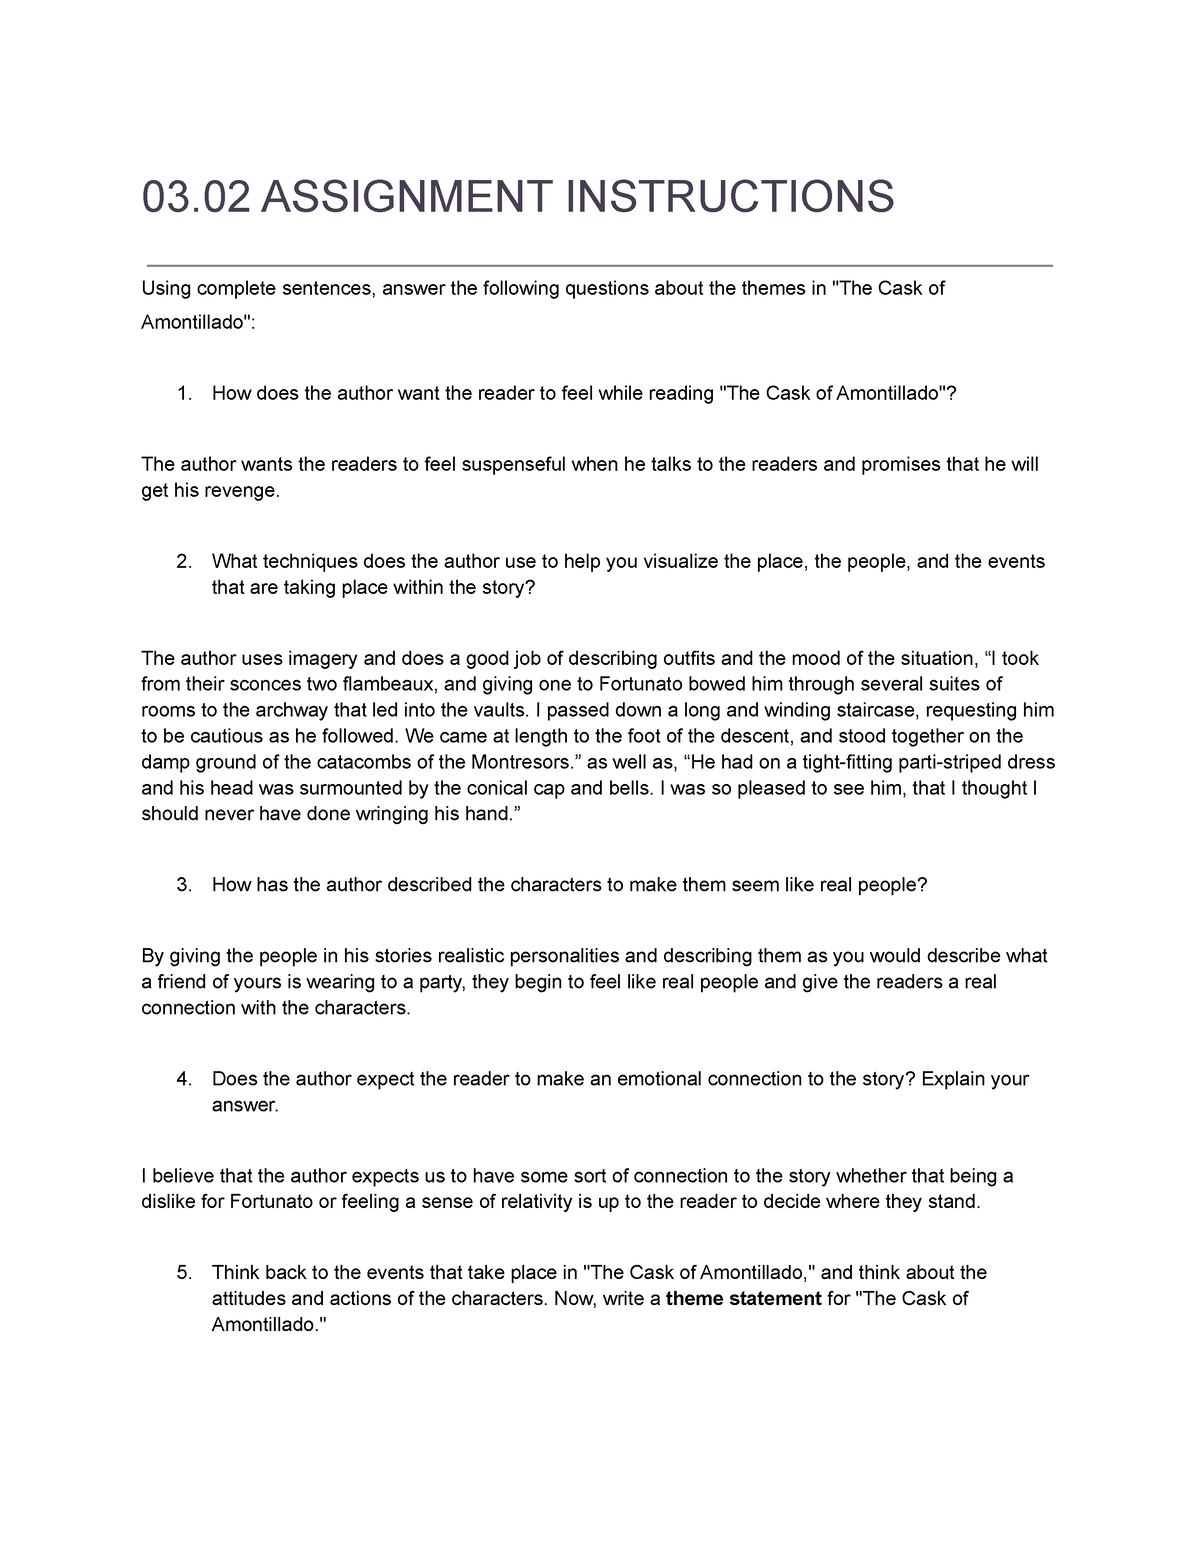 02.03 assignment instructions